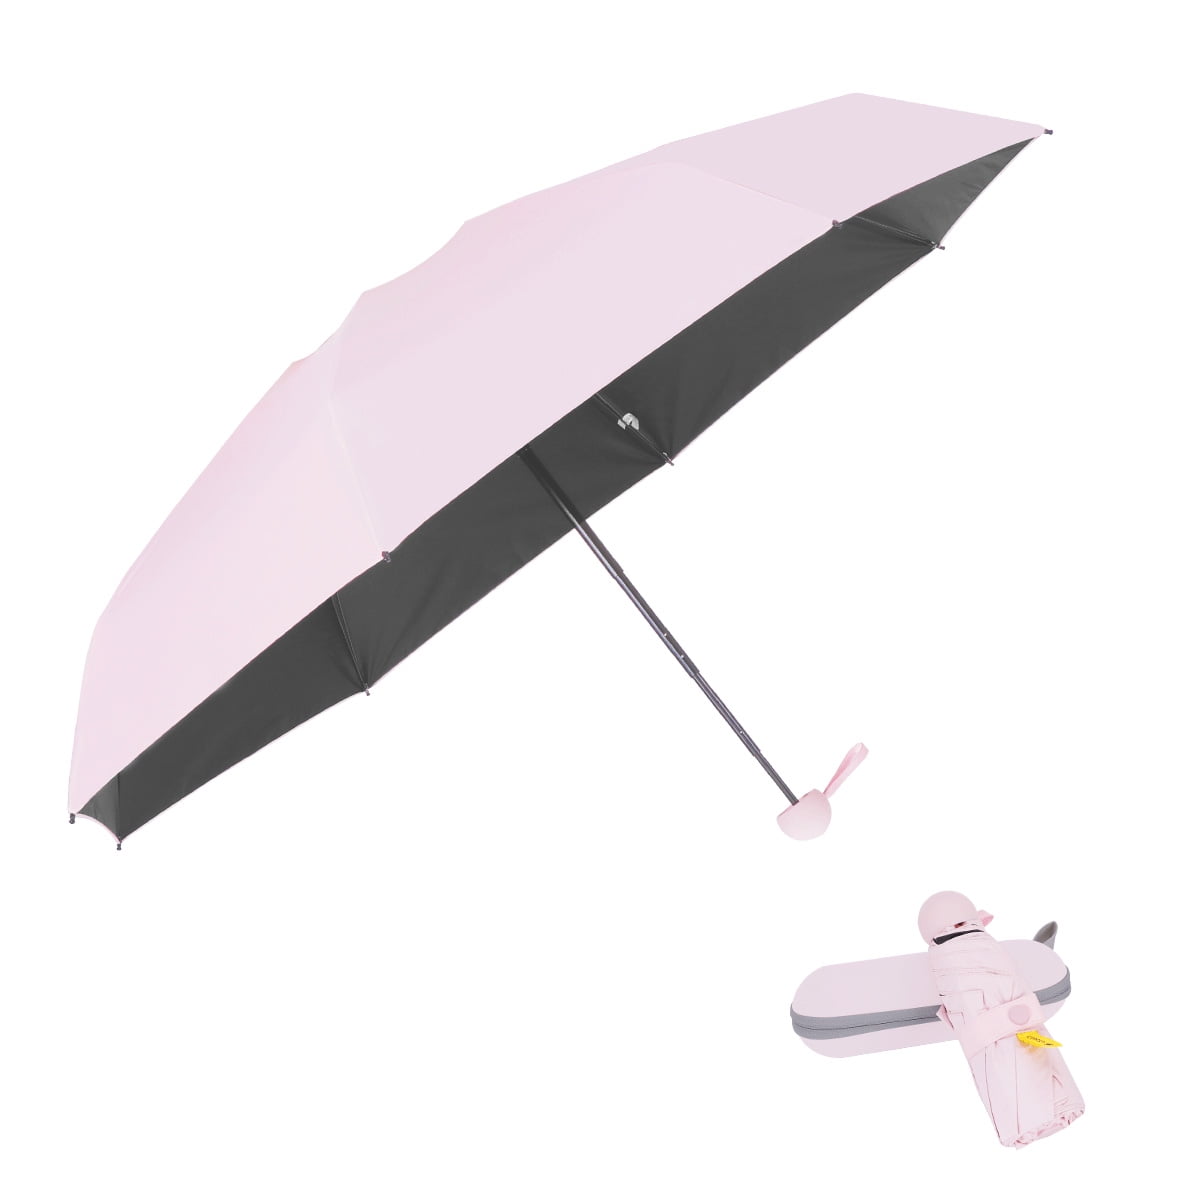 Blue Enterest Mini Portable Umbrella 6.69 inches The Best Intimate Helpmate for You Sun and Rain Umbrella It is Easy to Carry and Ideal for Travel